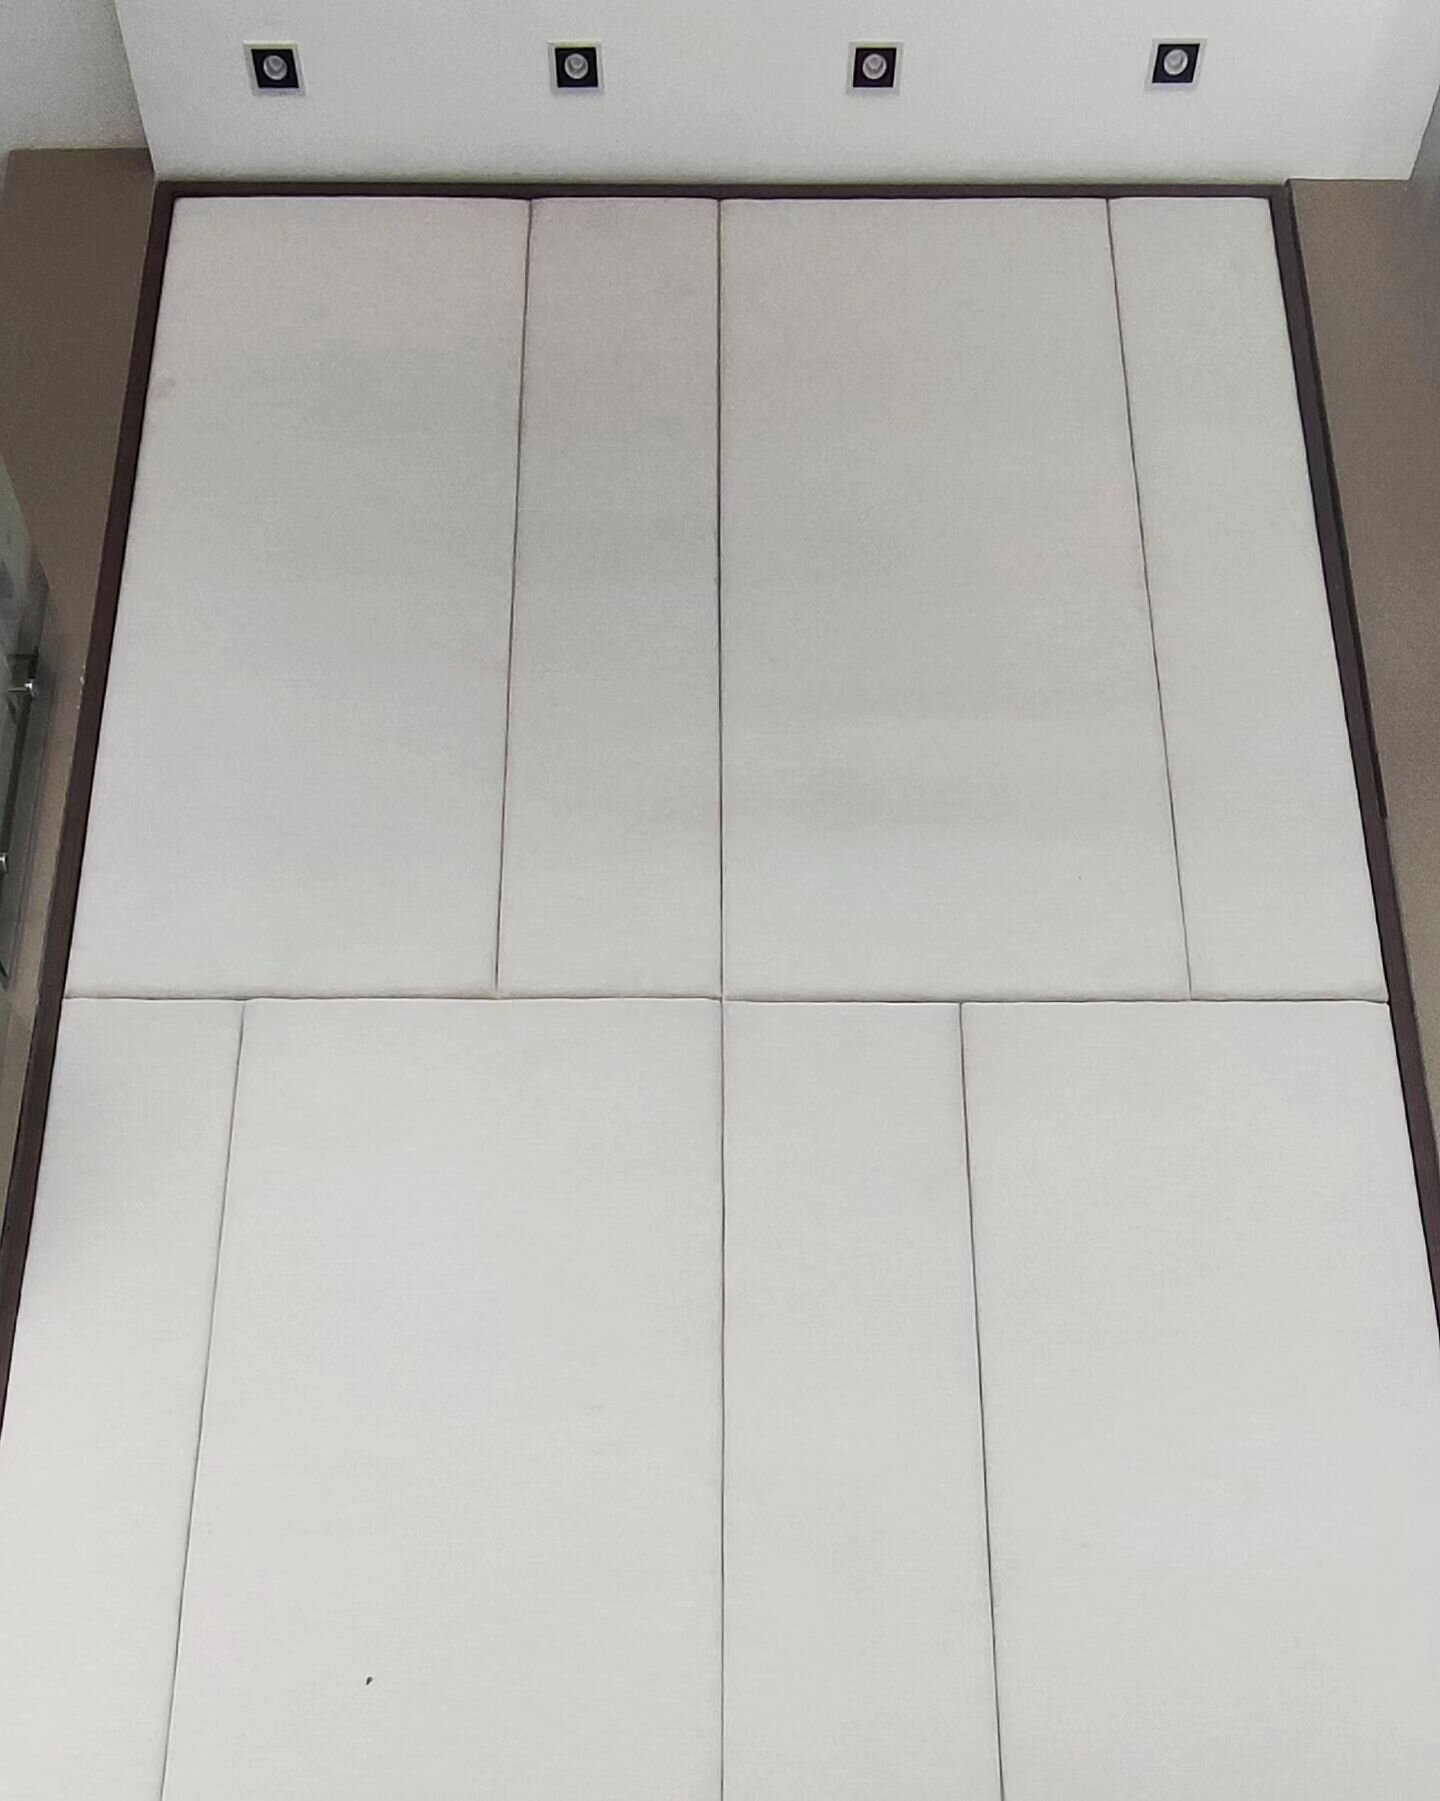 These are upholstered wall panels. It took the supplier three tries to finalize the quality and get our approval. The supplier adjusted the stretch to achieve a uniform appearance of the fabric, especially on the beveled edges and corners. The second